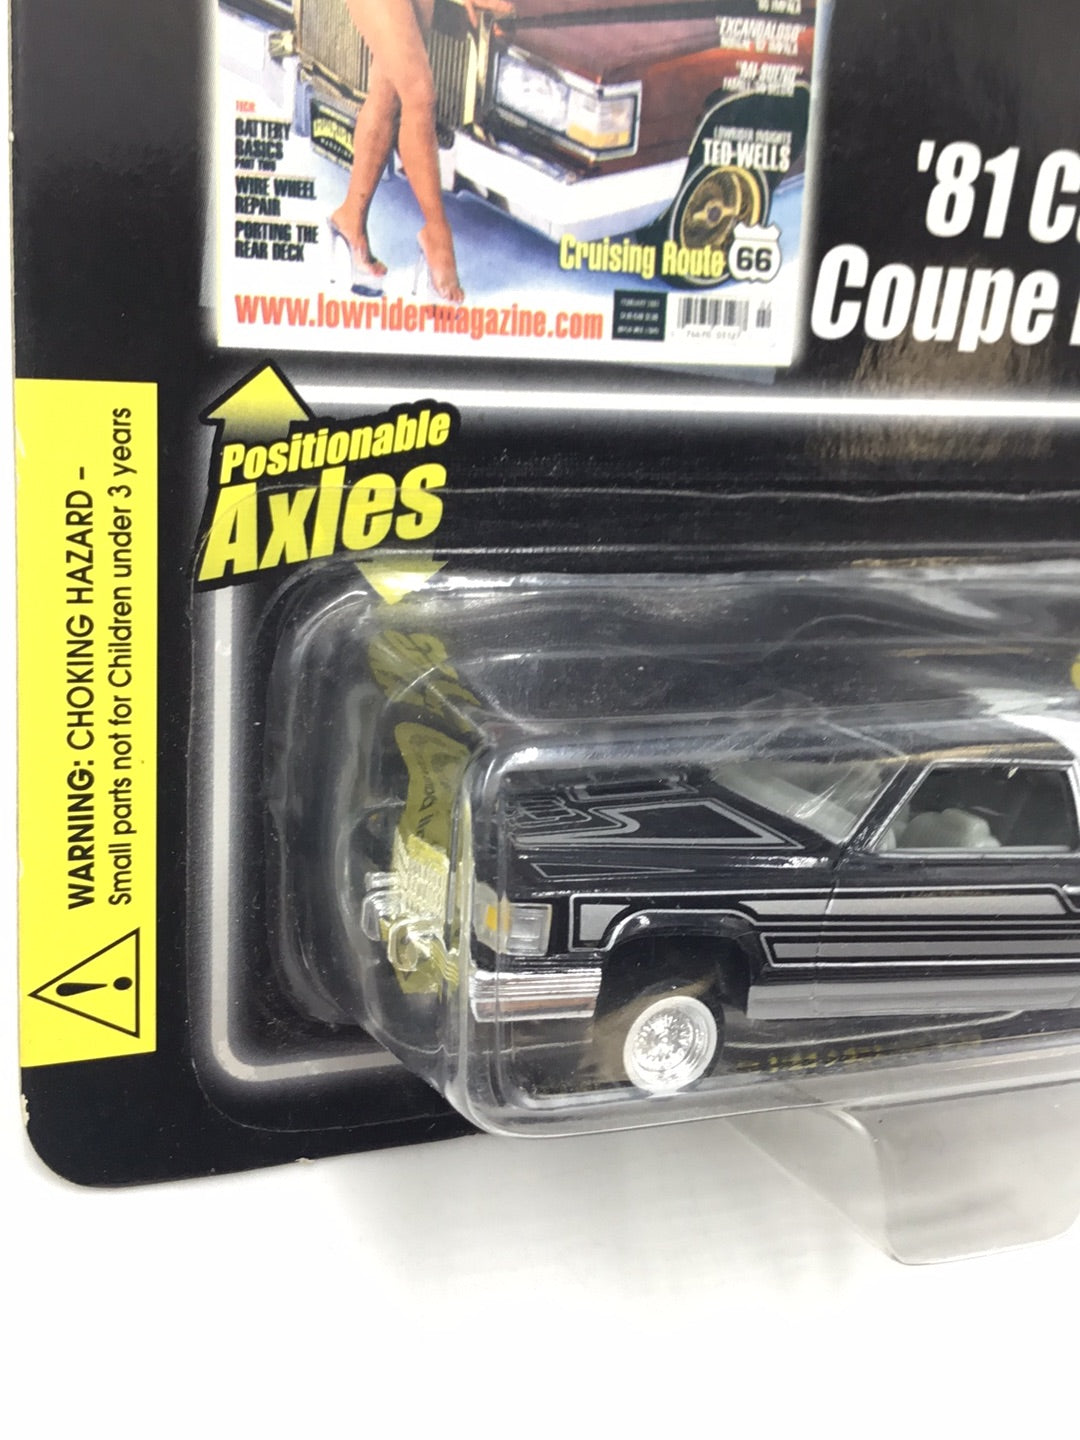 Revell Lowriders 1981 Cadillac Coupe Deville